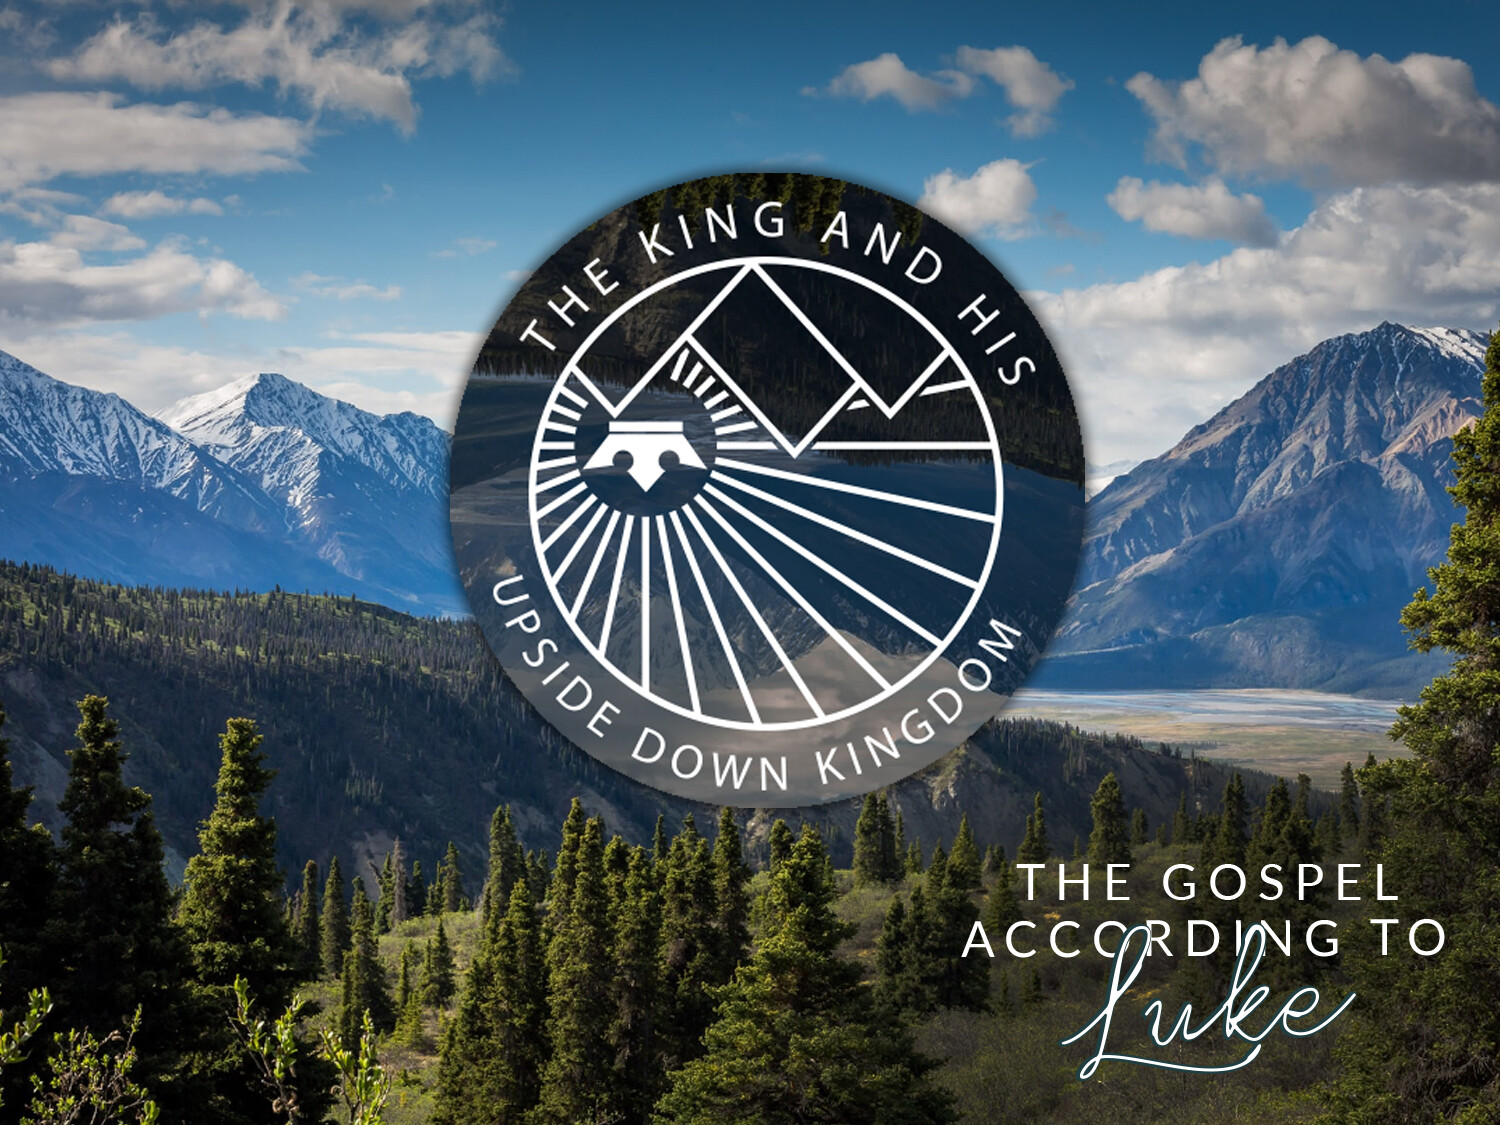 The Gospel of Luke: The King and His Upside Down Kingdom